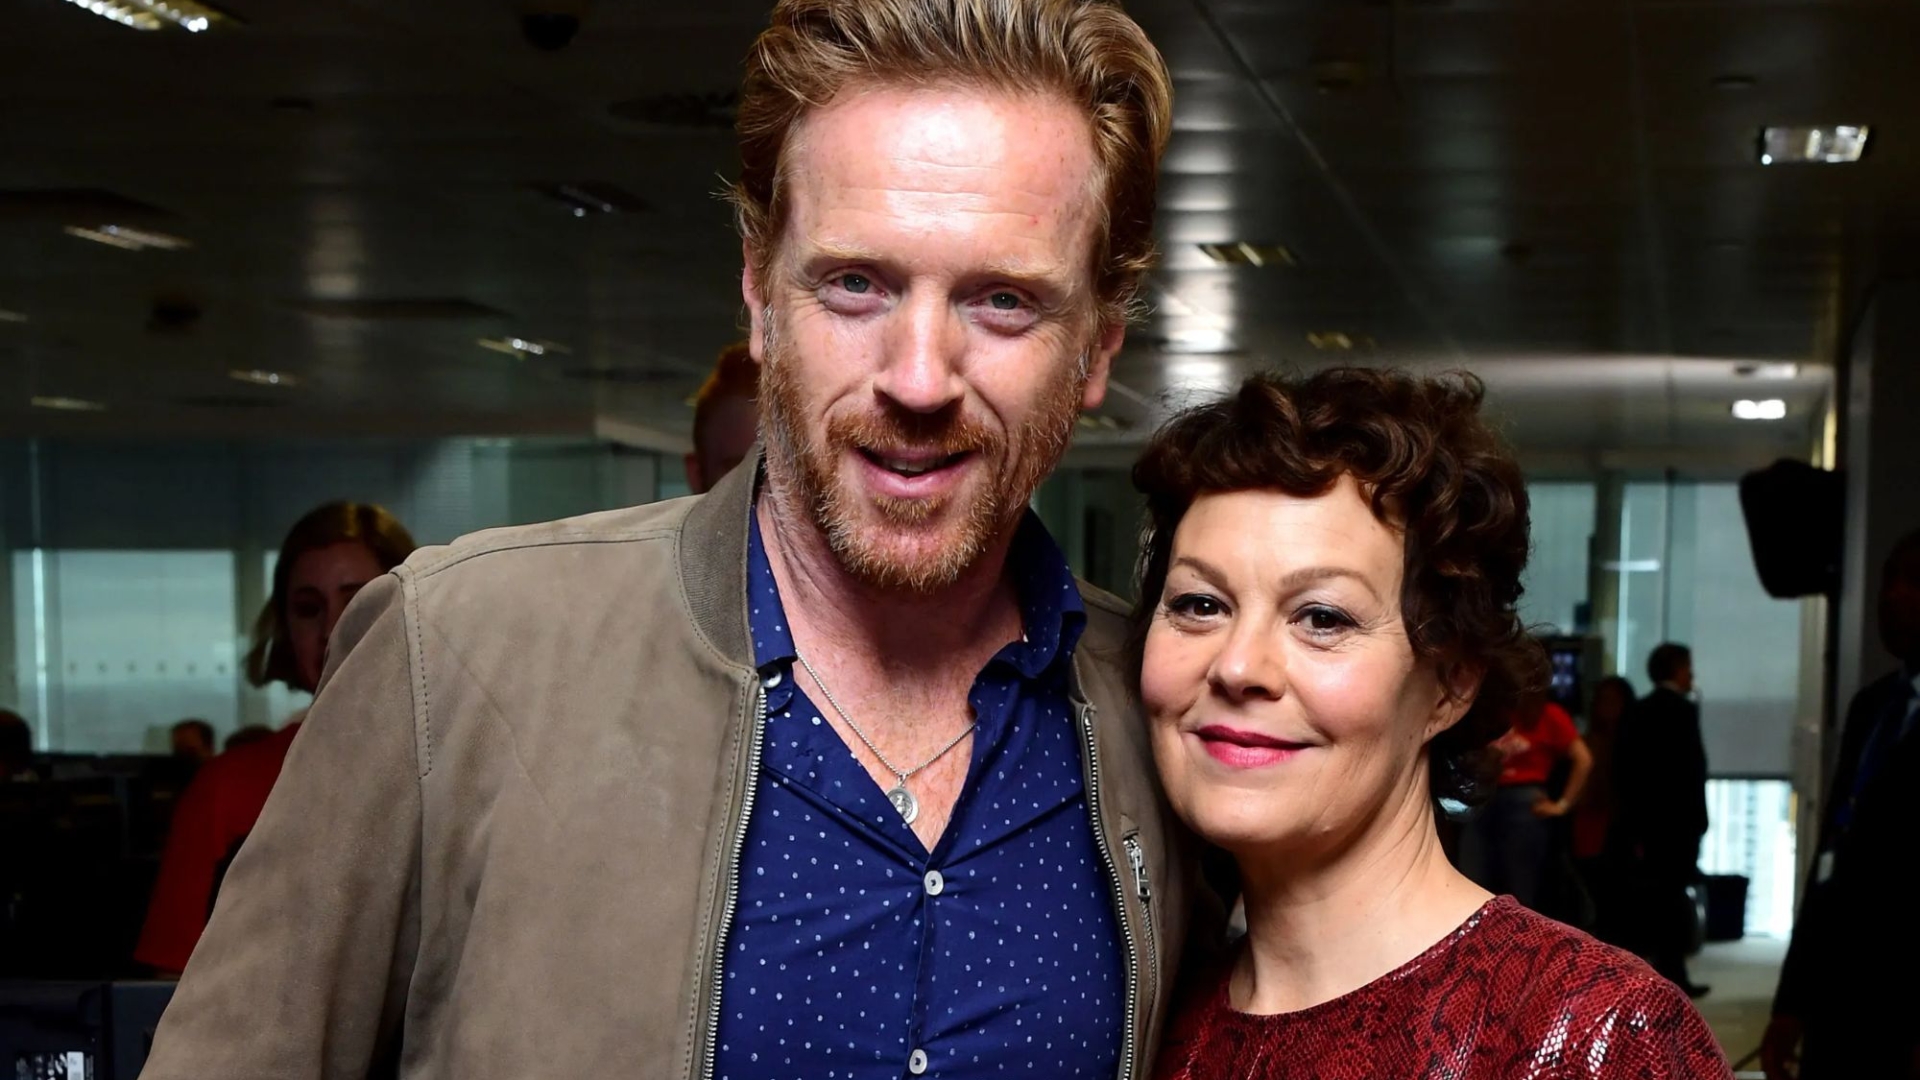 After Helen McCrory’s death, Damian Lewis was ‘drained’ and ‘exhausted’.